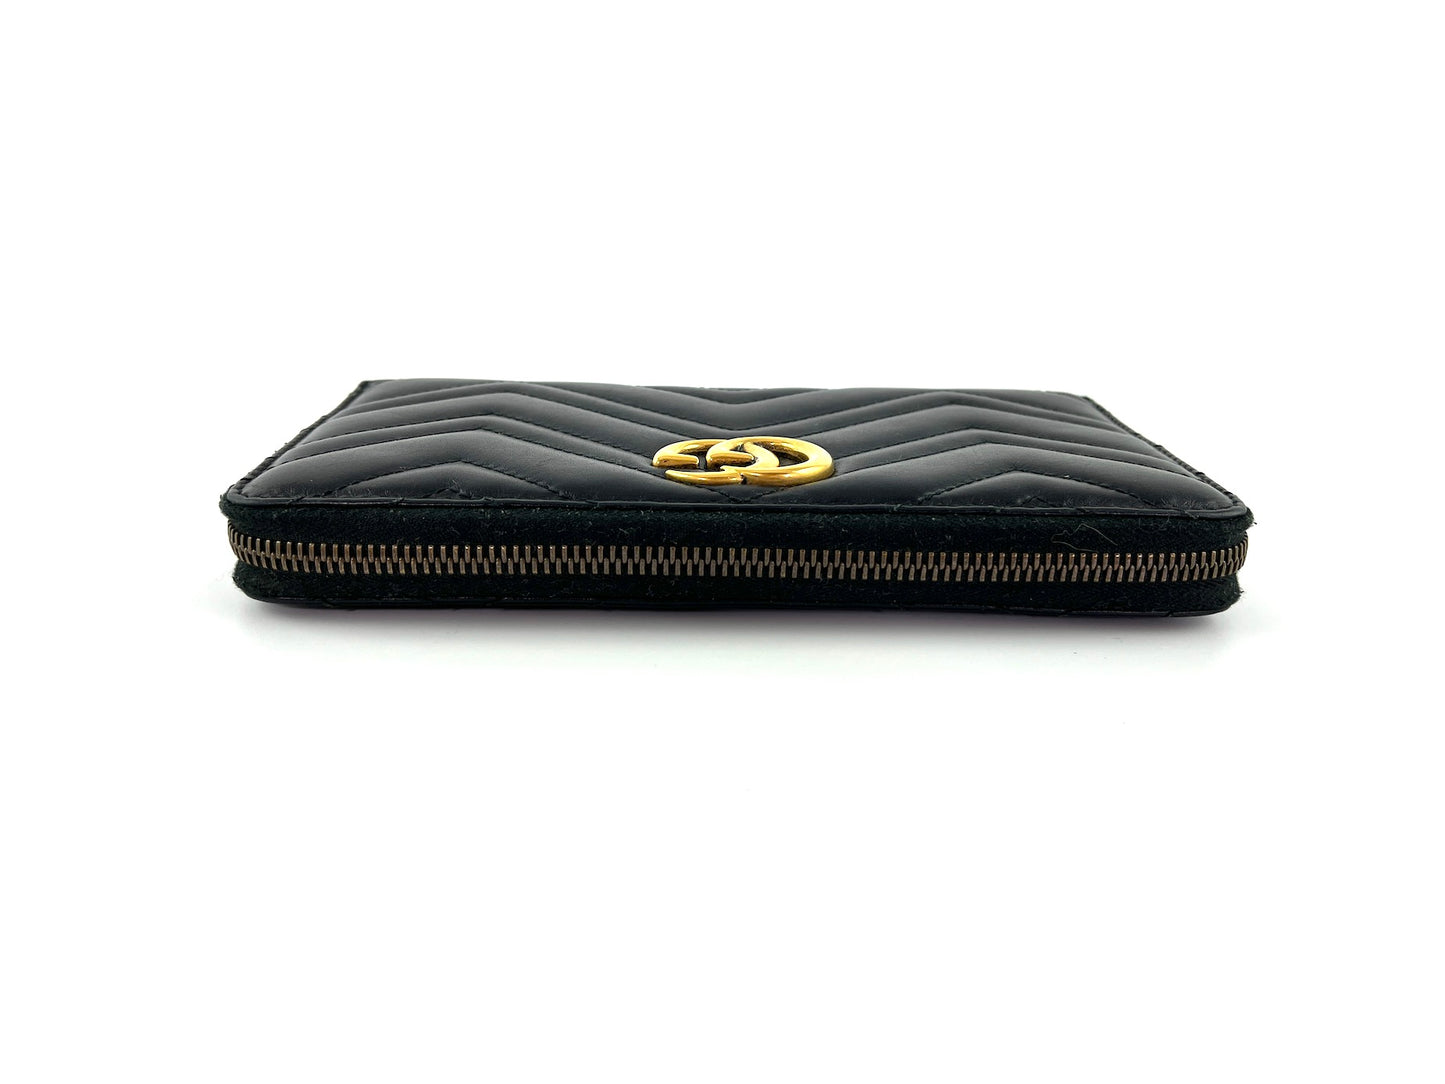 GUCCI GG Marmont Matelasse Black Quilted Zip Around Continental Wallet